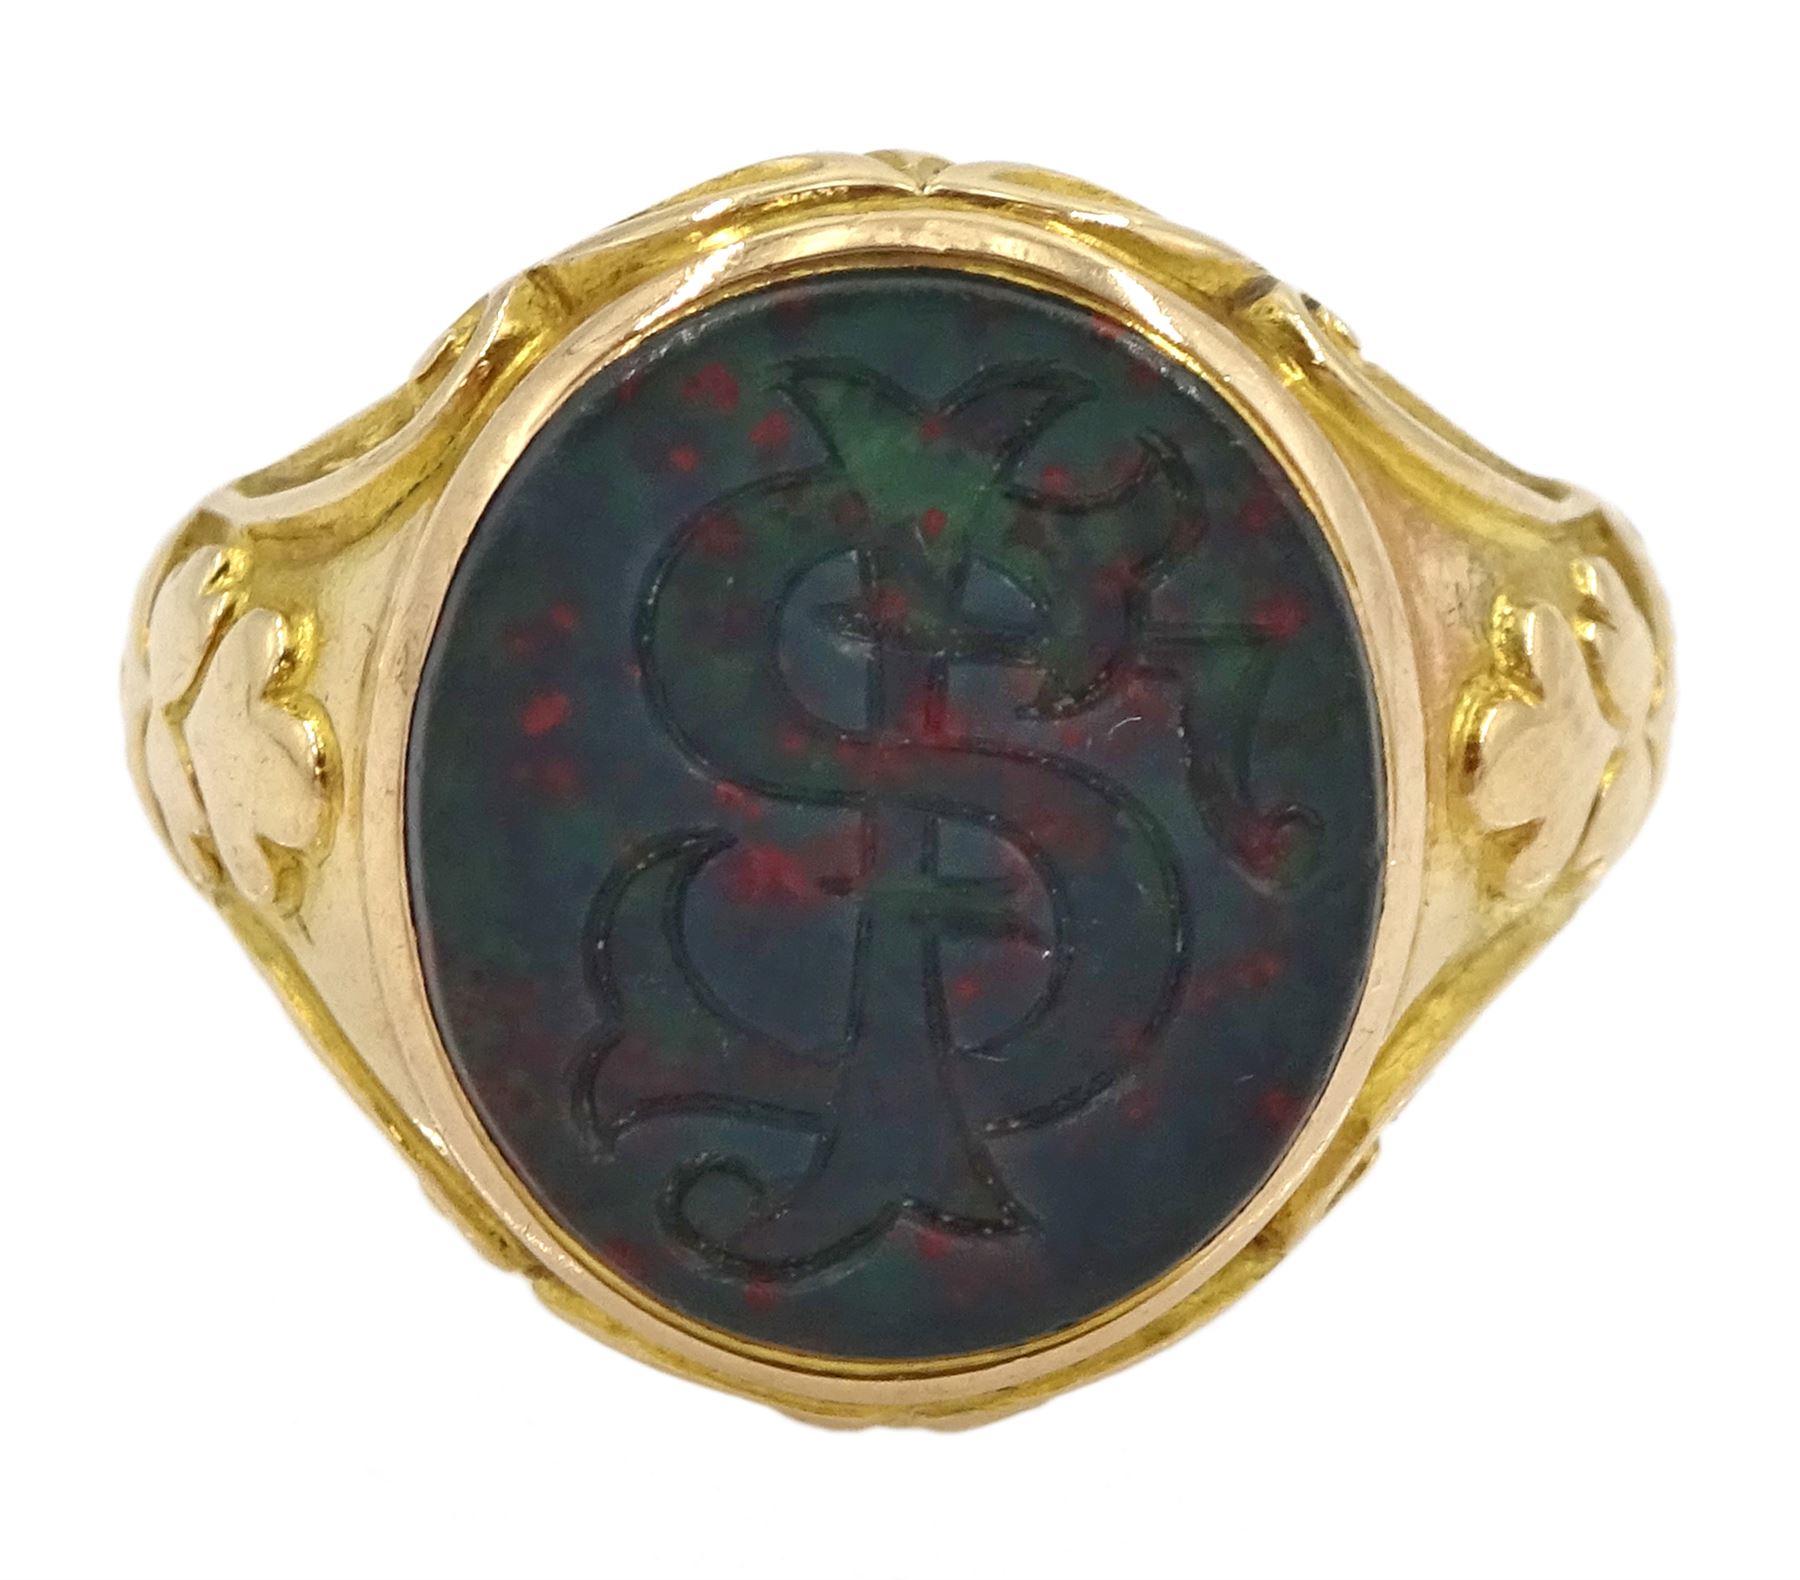 Early 20th century 15ct gold bloodstone signet ring